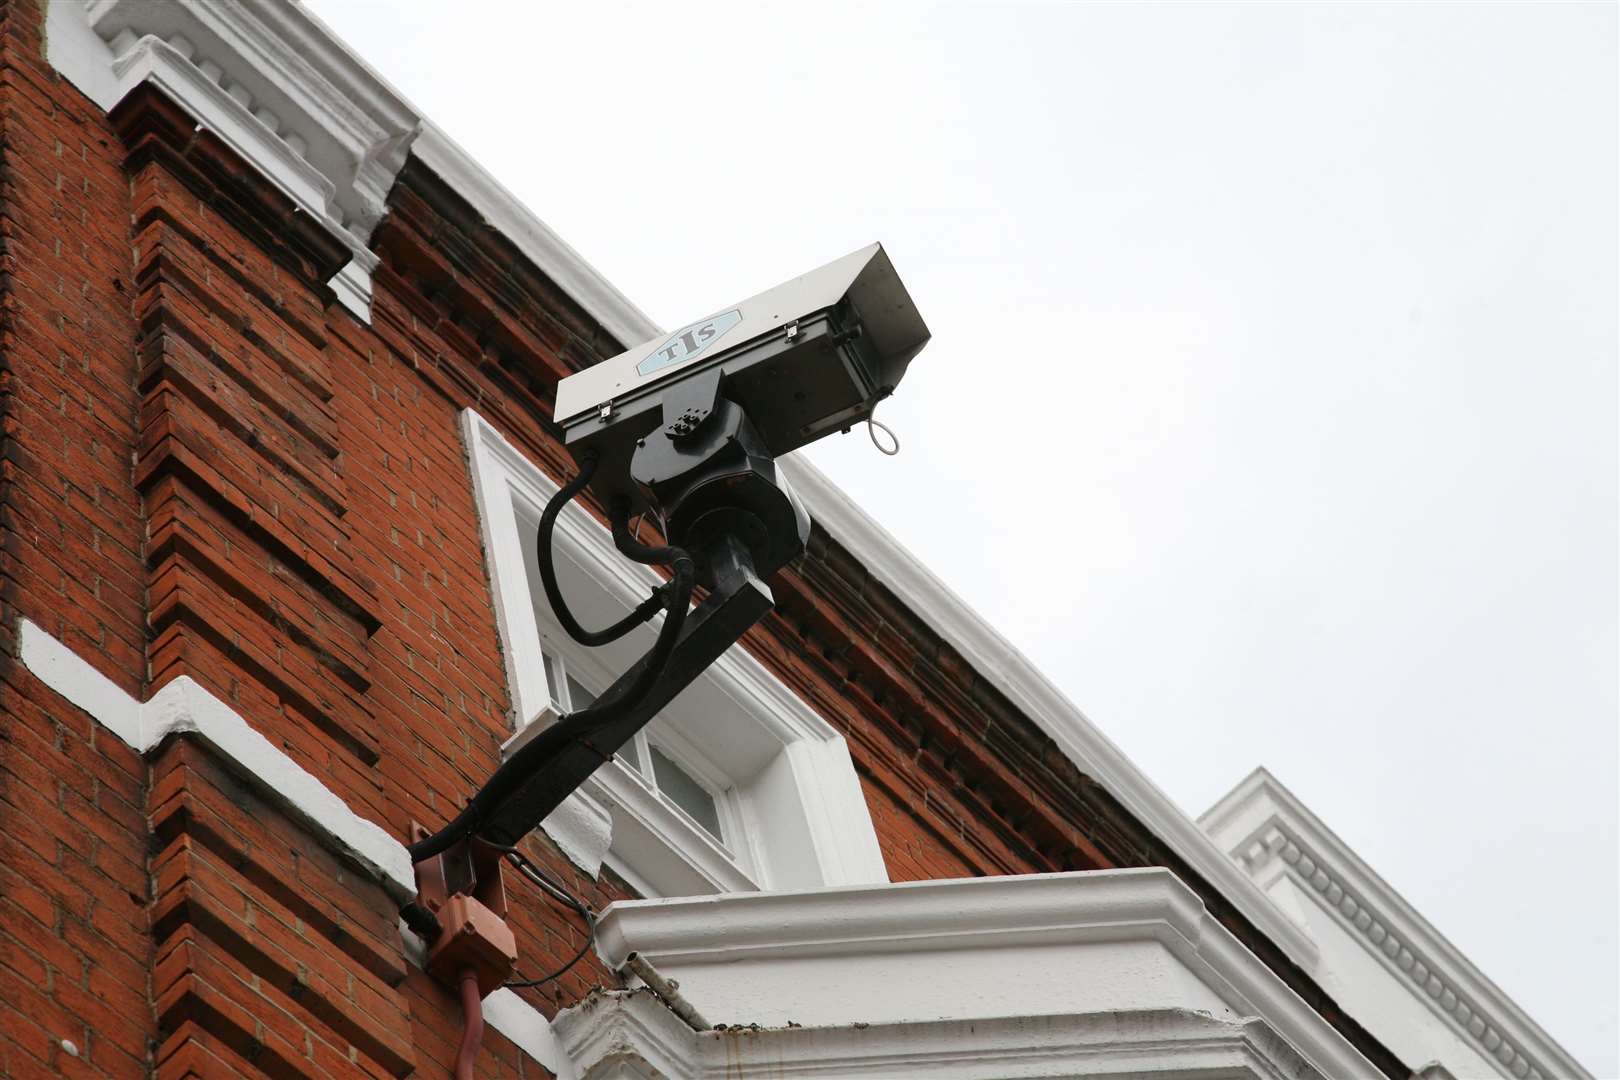 Councils are expected to use cameras to fine drivers for moving traffic offences